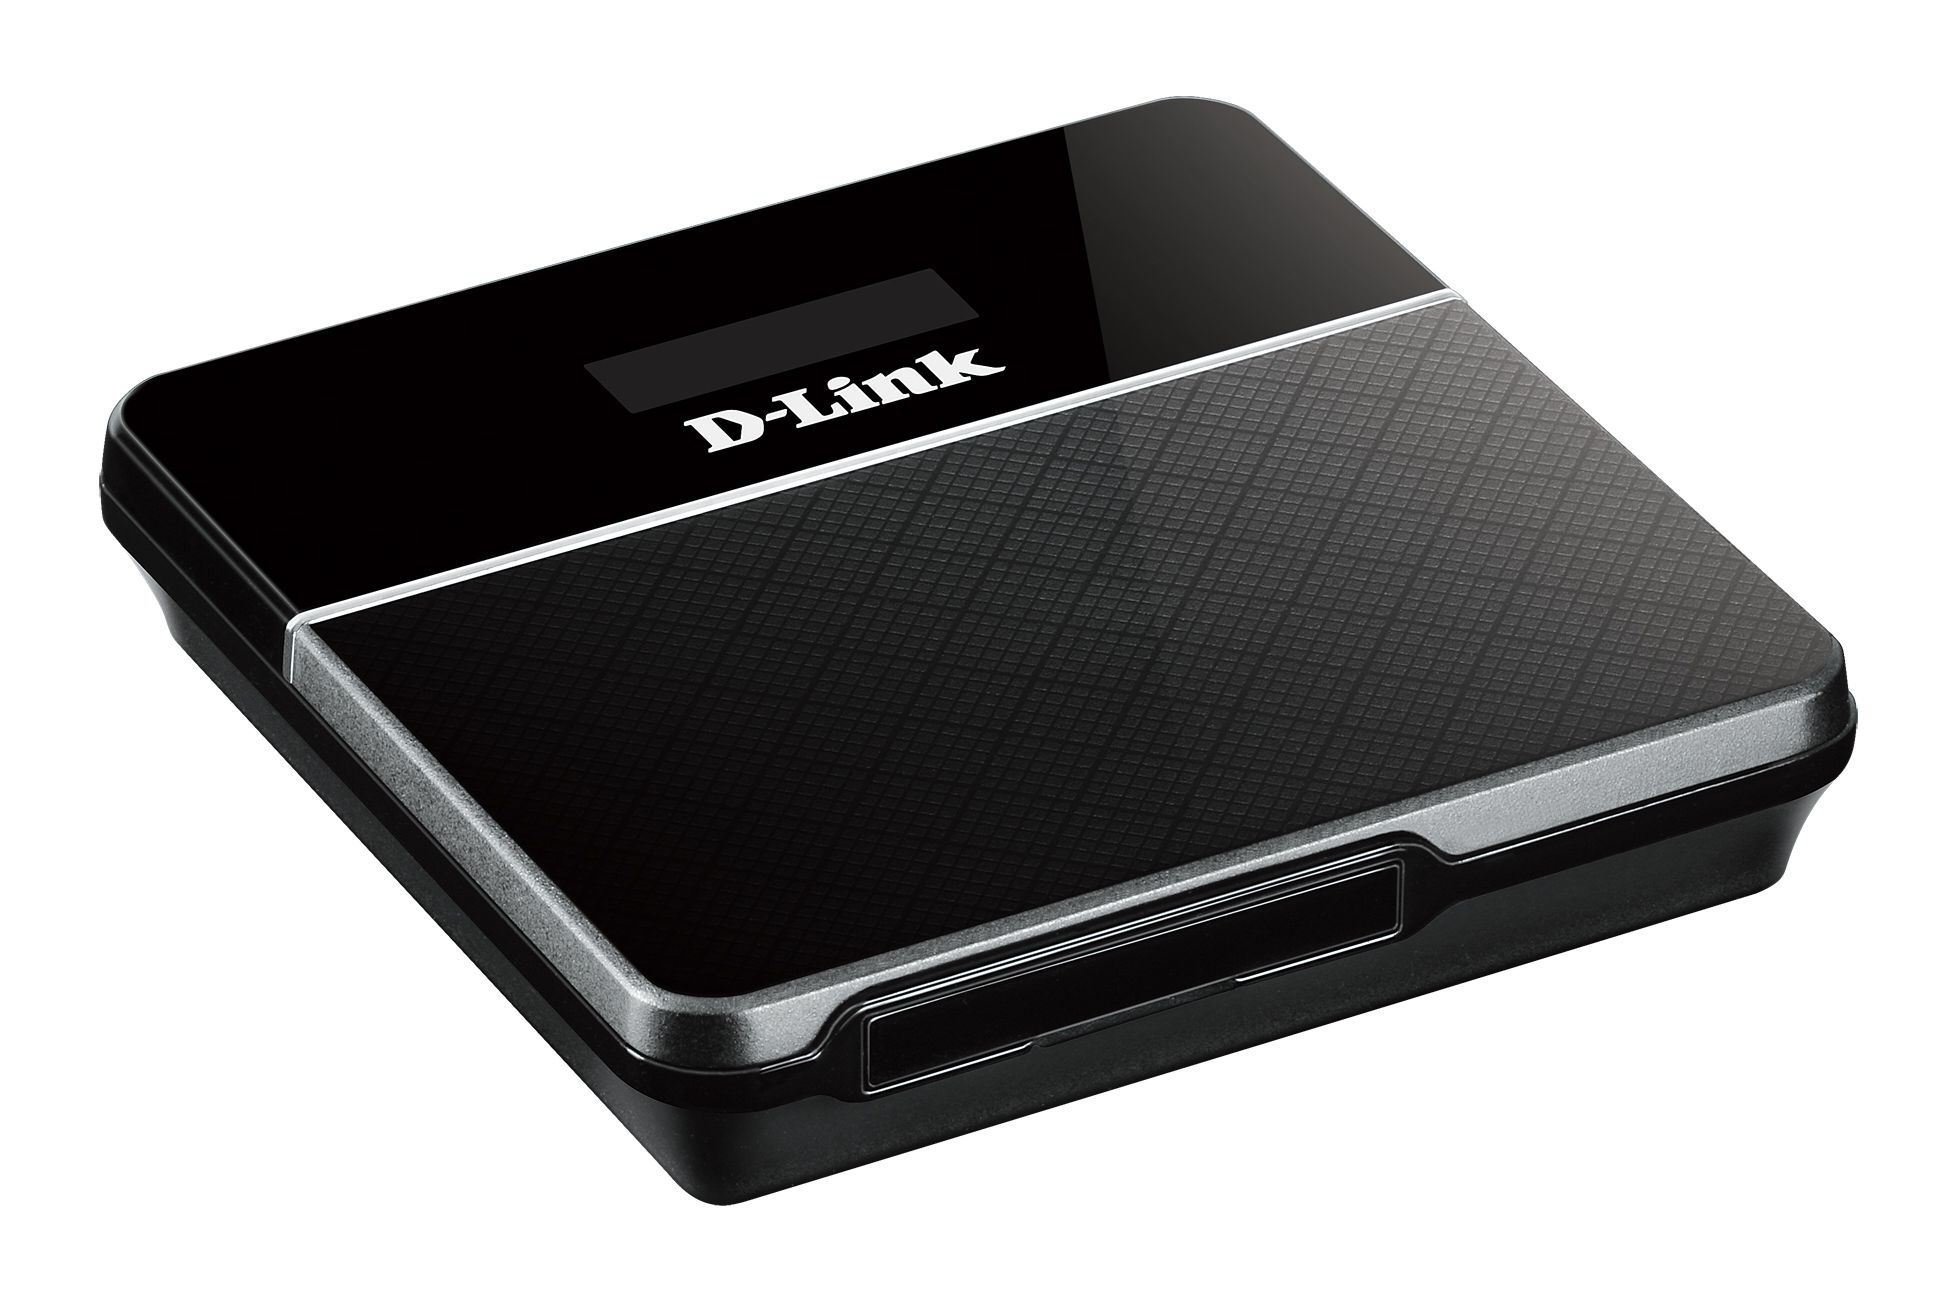 Router d-link dwr-932 wan: 1x3g/4g wifi: 802.11n-150mbps